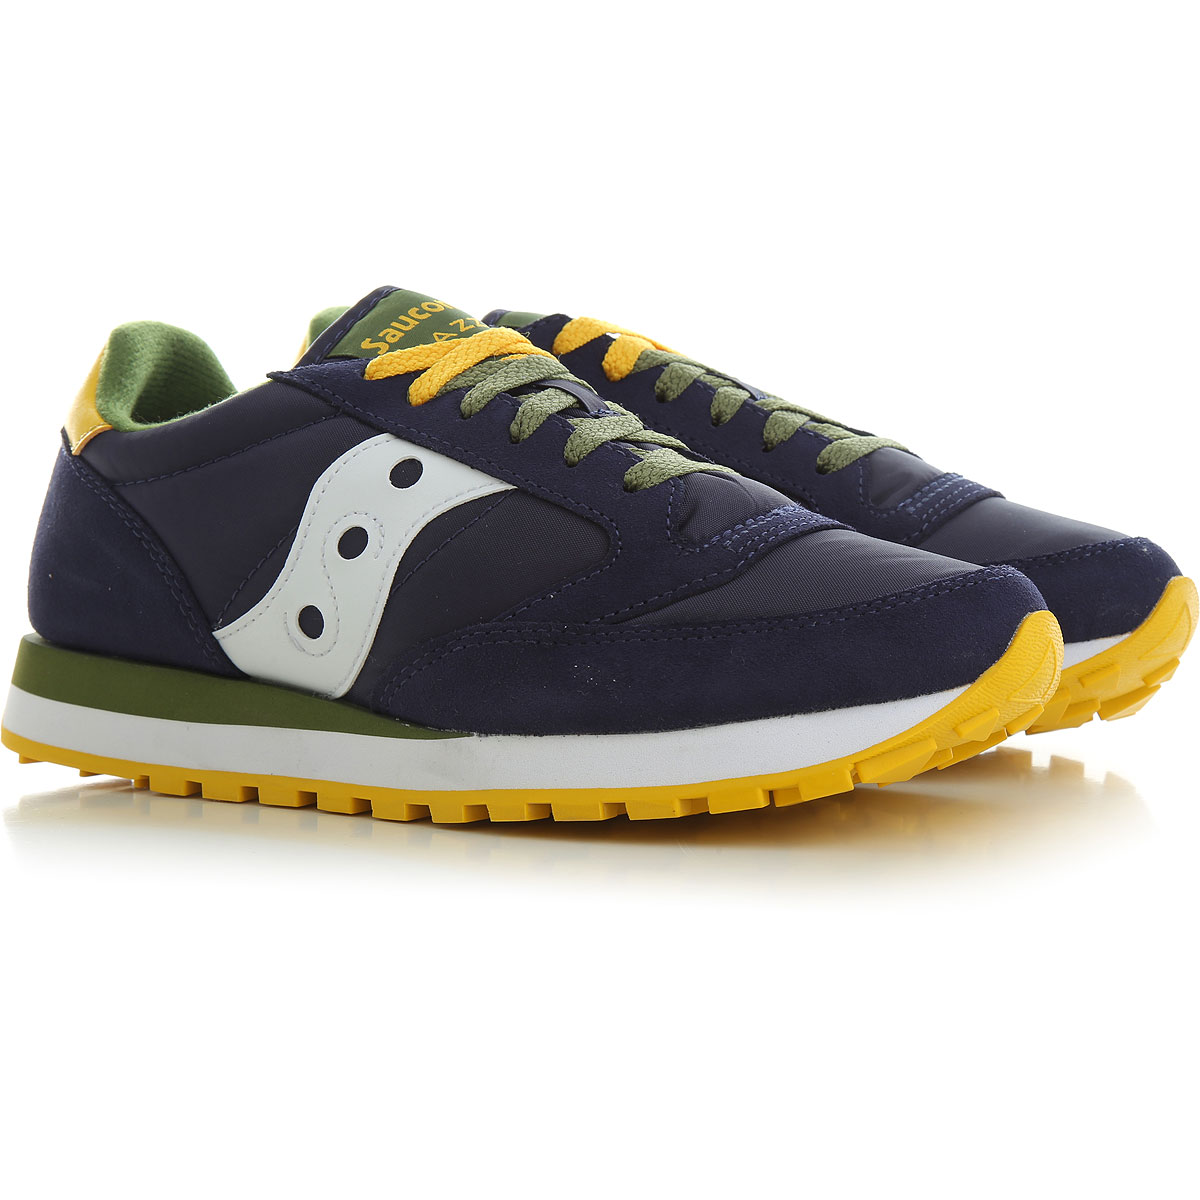 Mens Shoes Saucony, Style code: s2044-616-